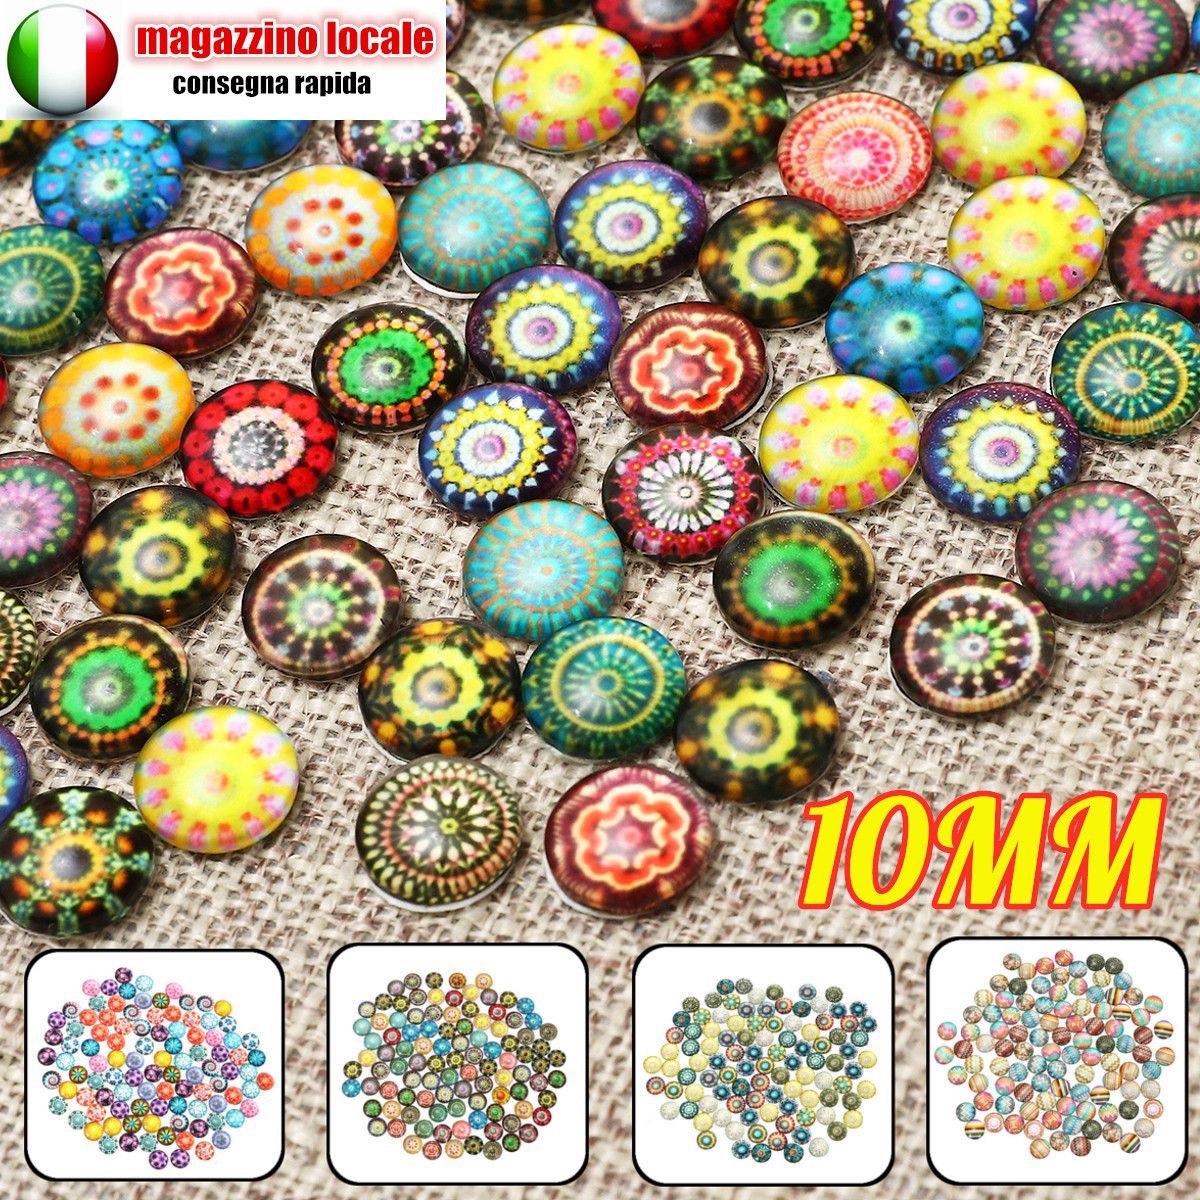 100PcsSet-10MM-Round-Mixed-Supplies-Crafted-Handcrafted-Tiles-For-Jewelry-Making-Decorations-1532873